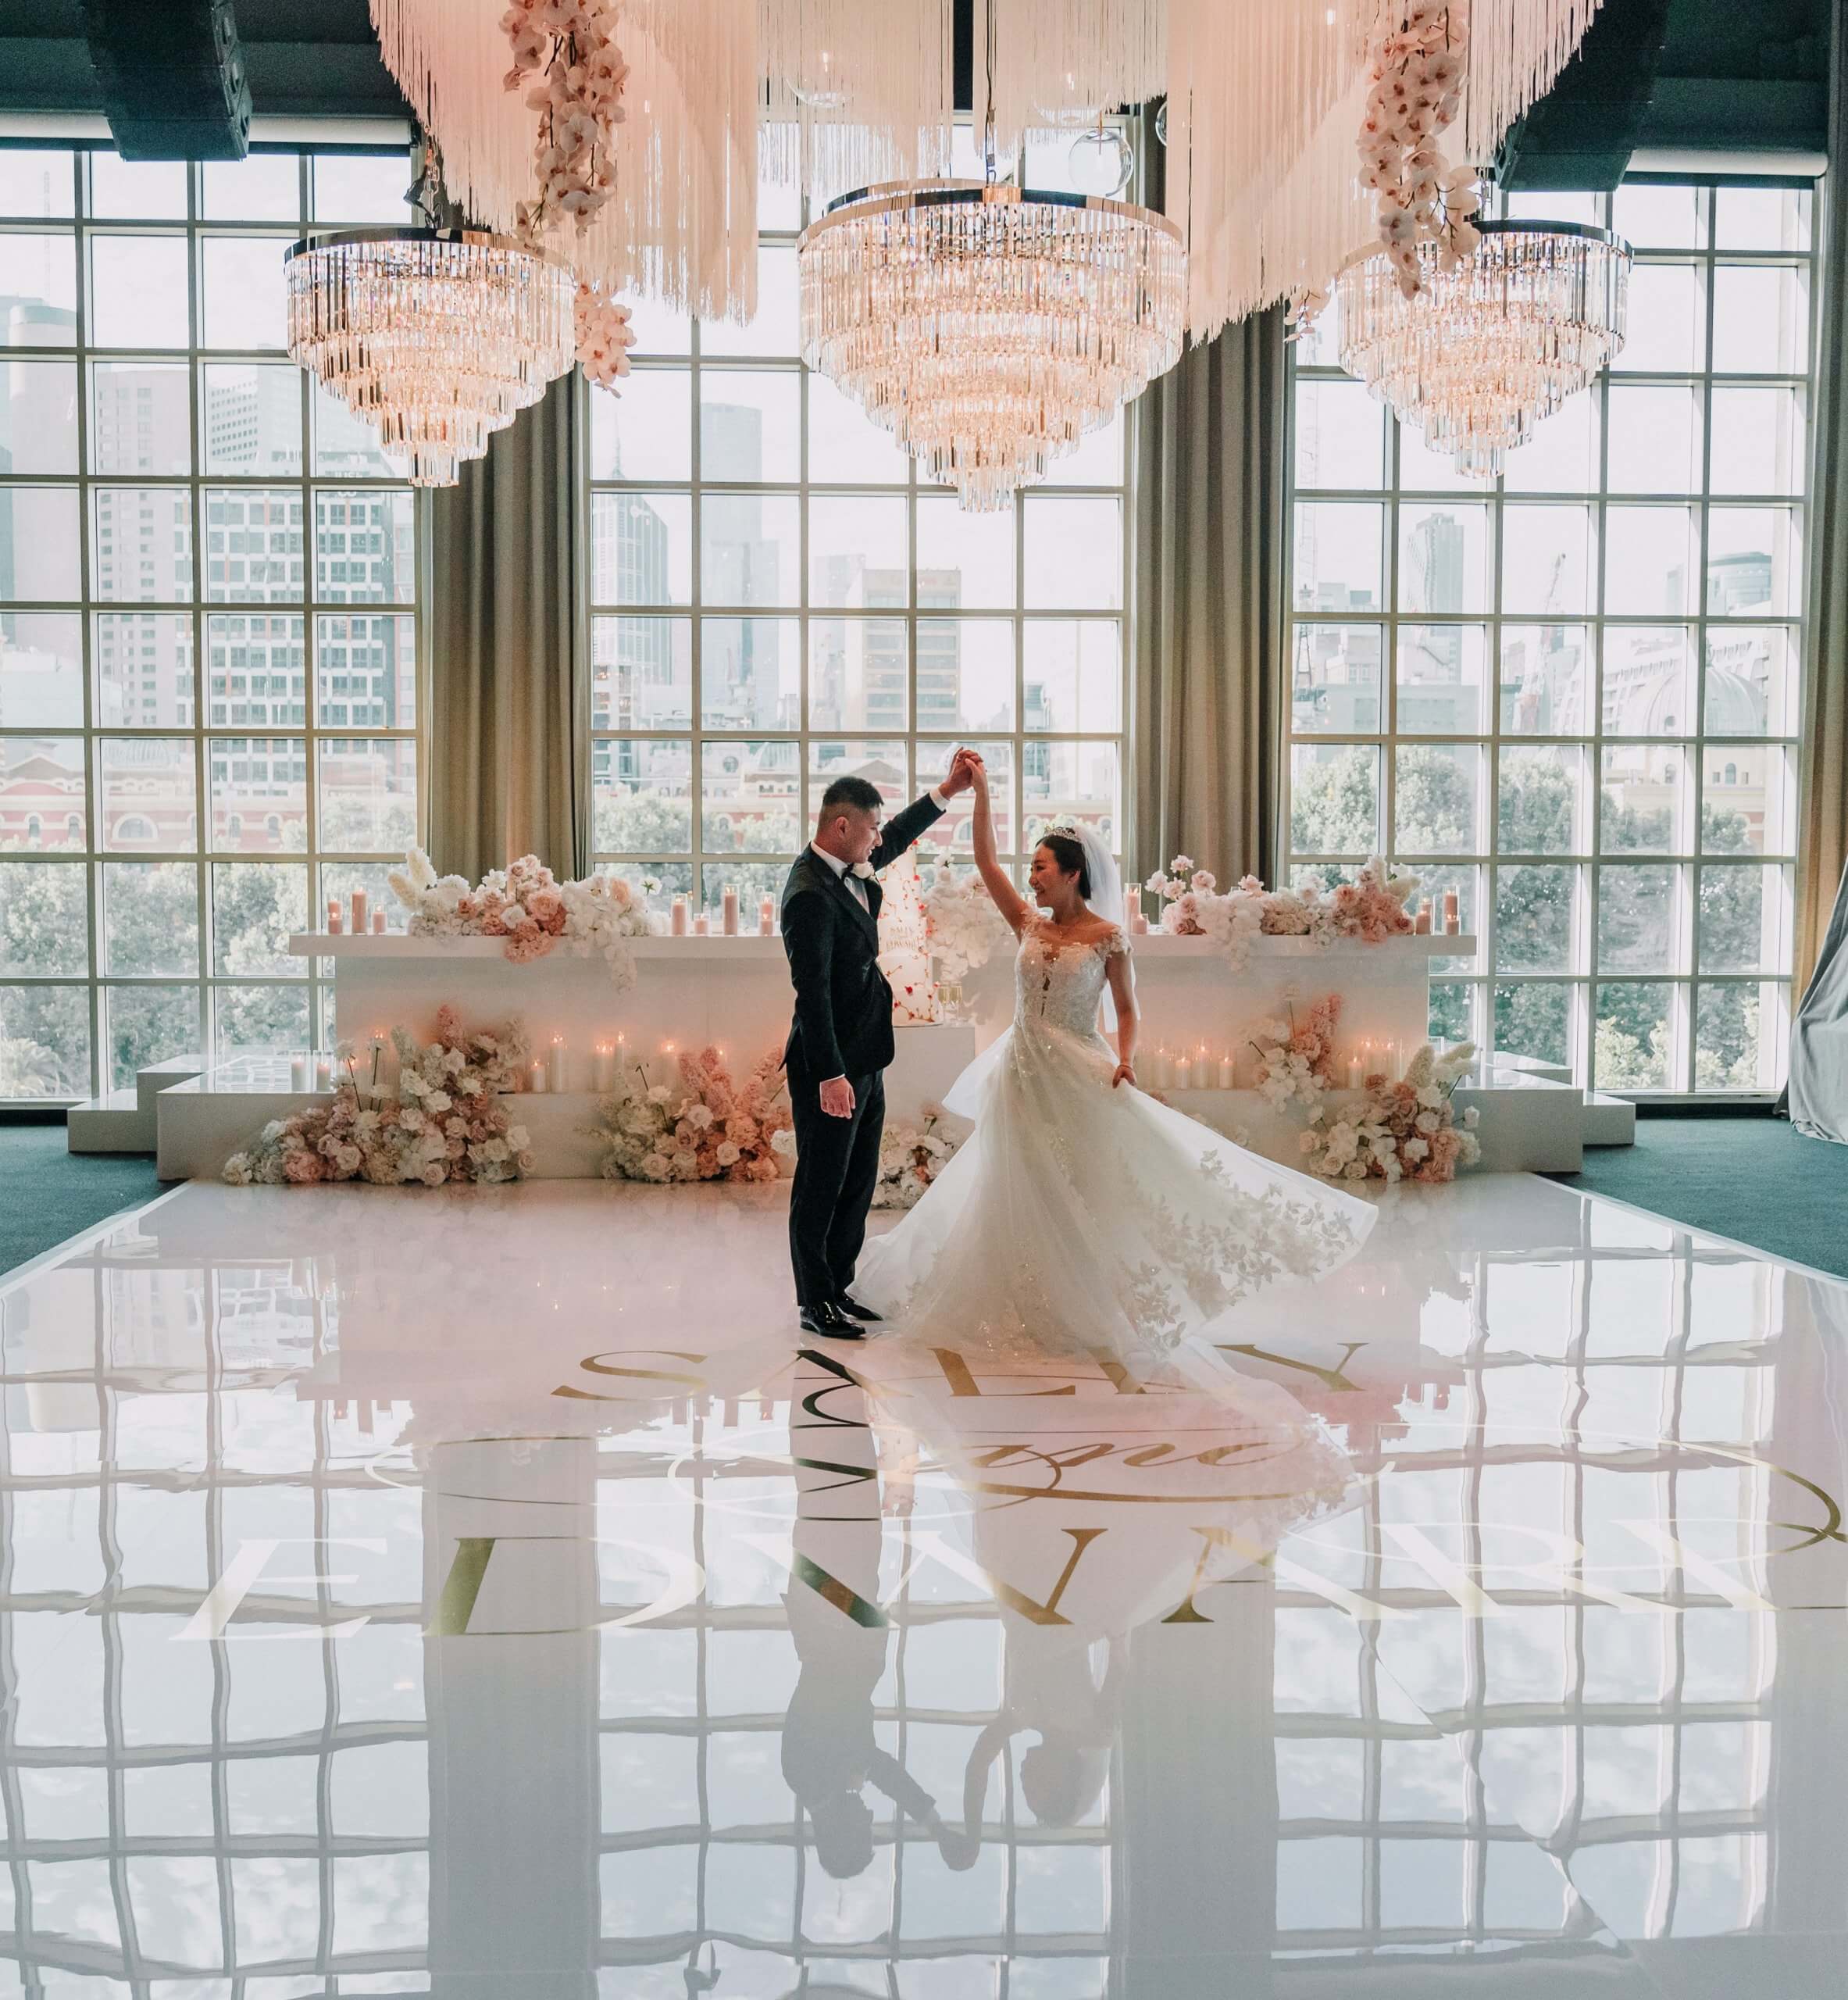 Stunning photo of the bride and groom during their first dance. The groom twirls the bride as they dance surrounded by pretty pink flowers and under a stunning crystal chandelier.